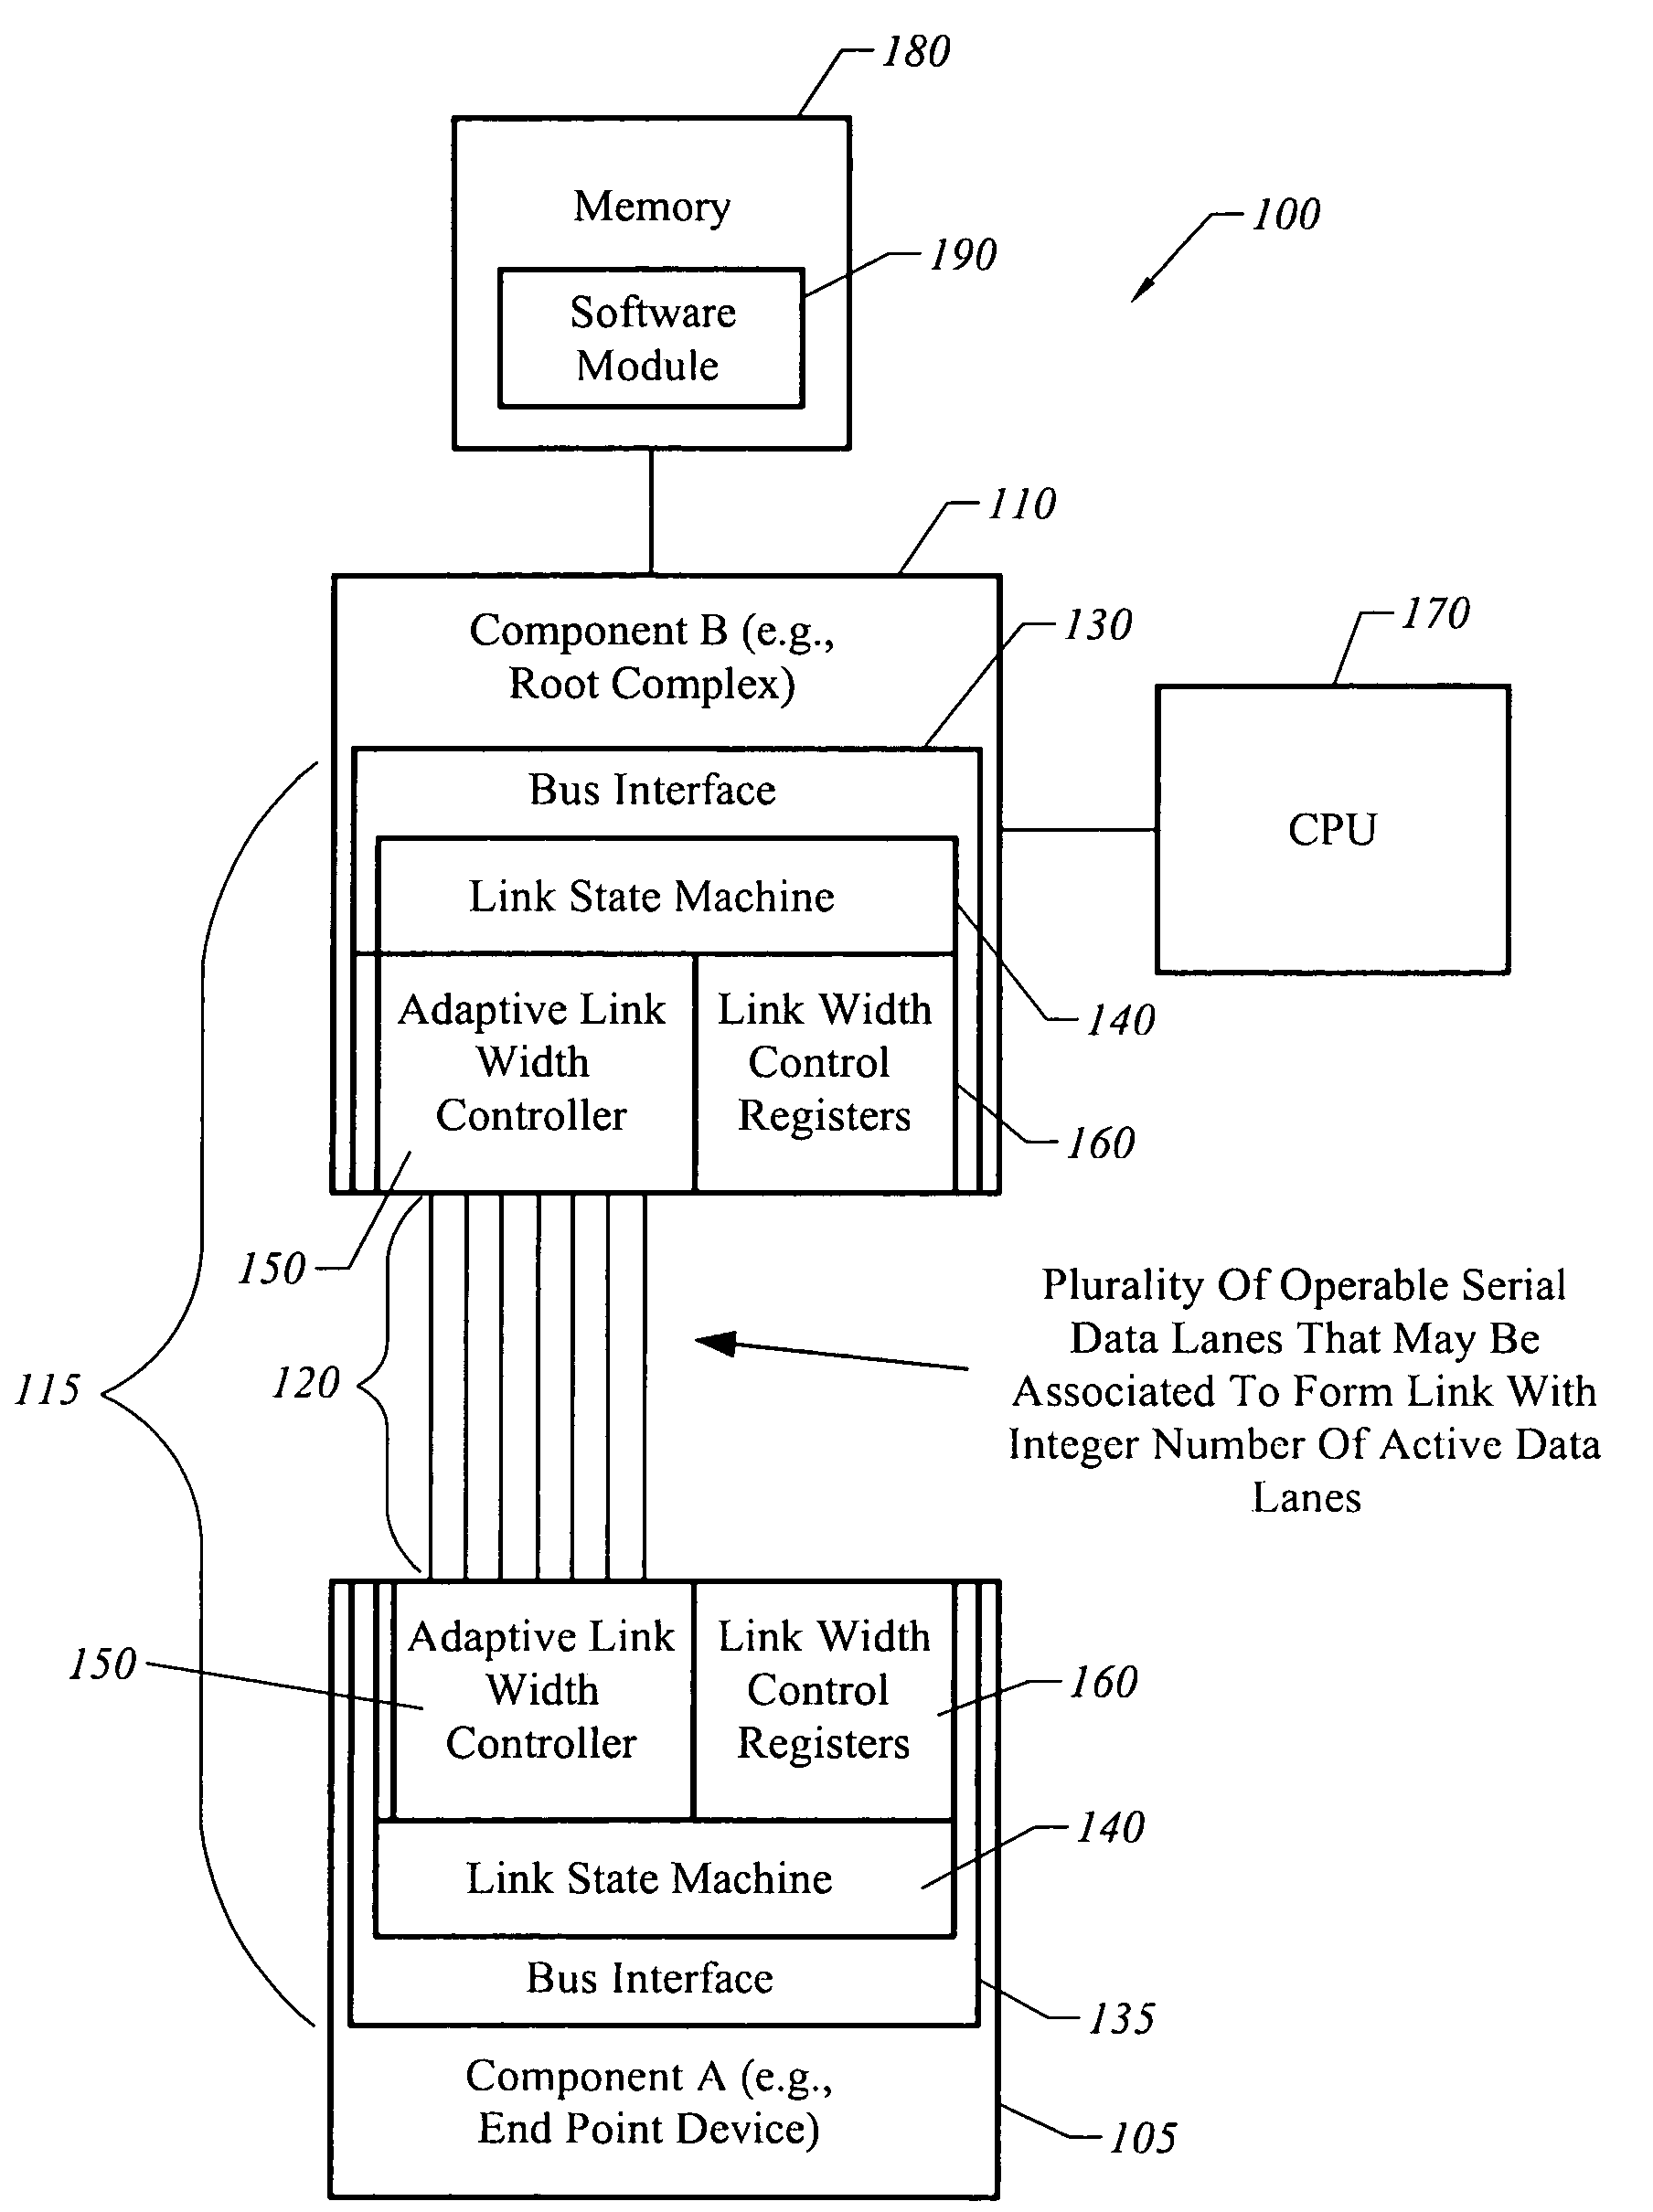 Logical-to-physical lane assignment to reduce clock power dissipation in a bus having a variable link width